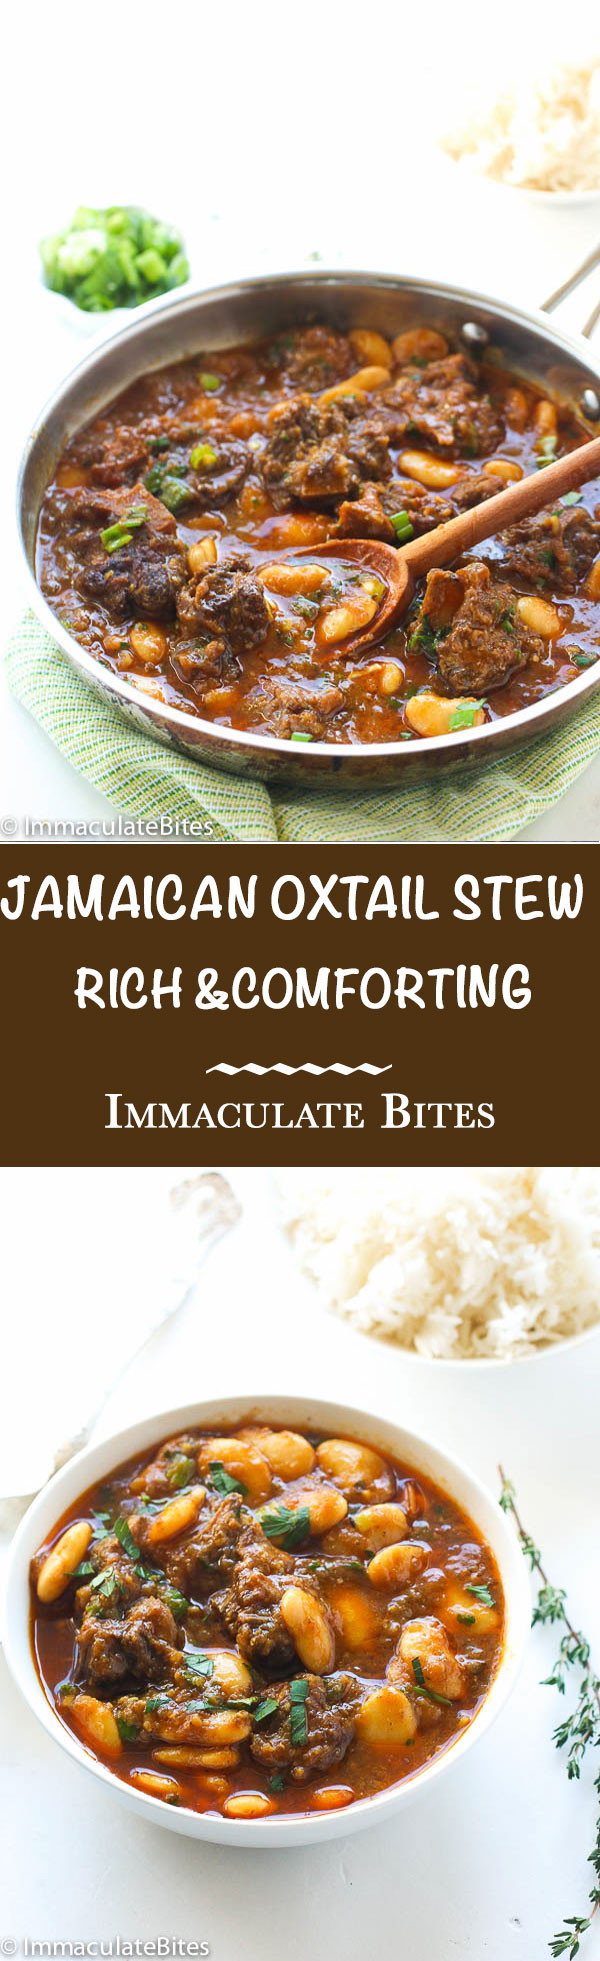 Jamaican Oxtail Stew Recipe
 Jamaican Oxtail Stew Immaculate Bites